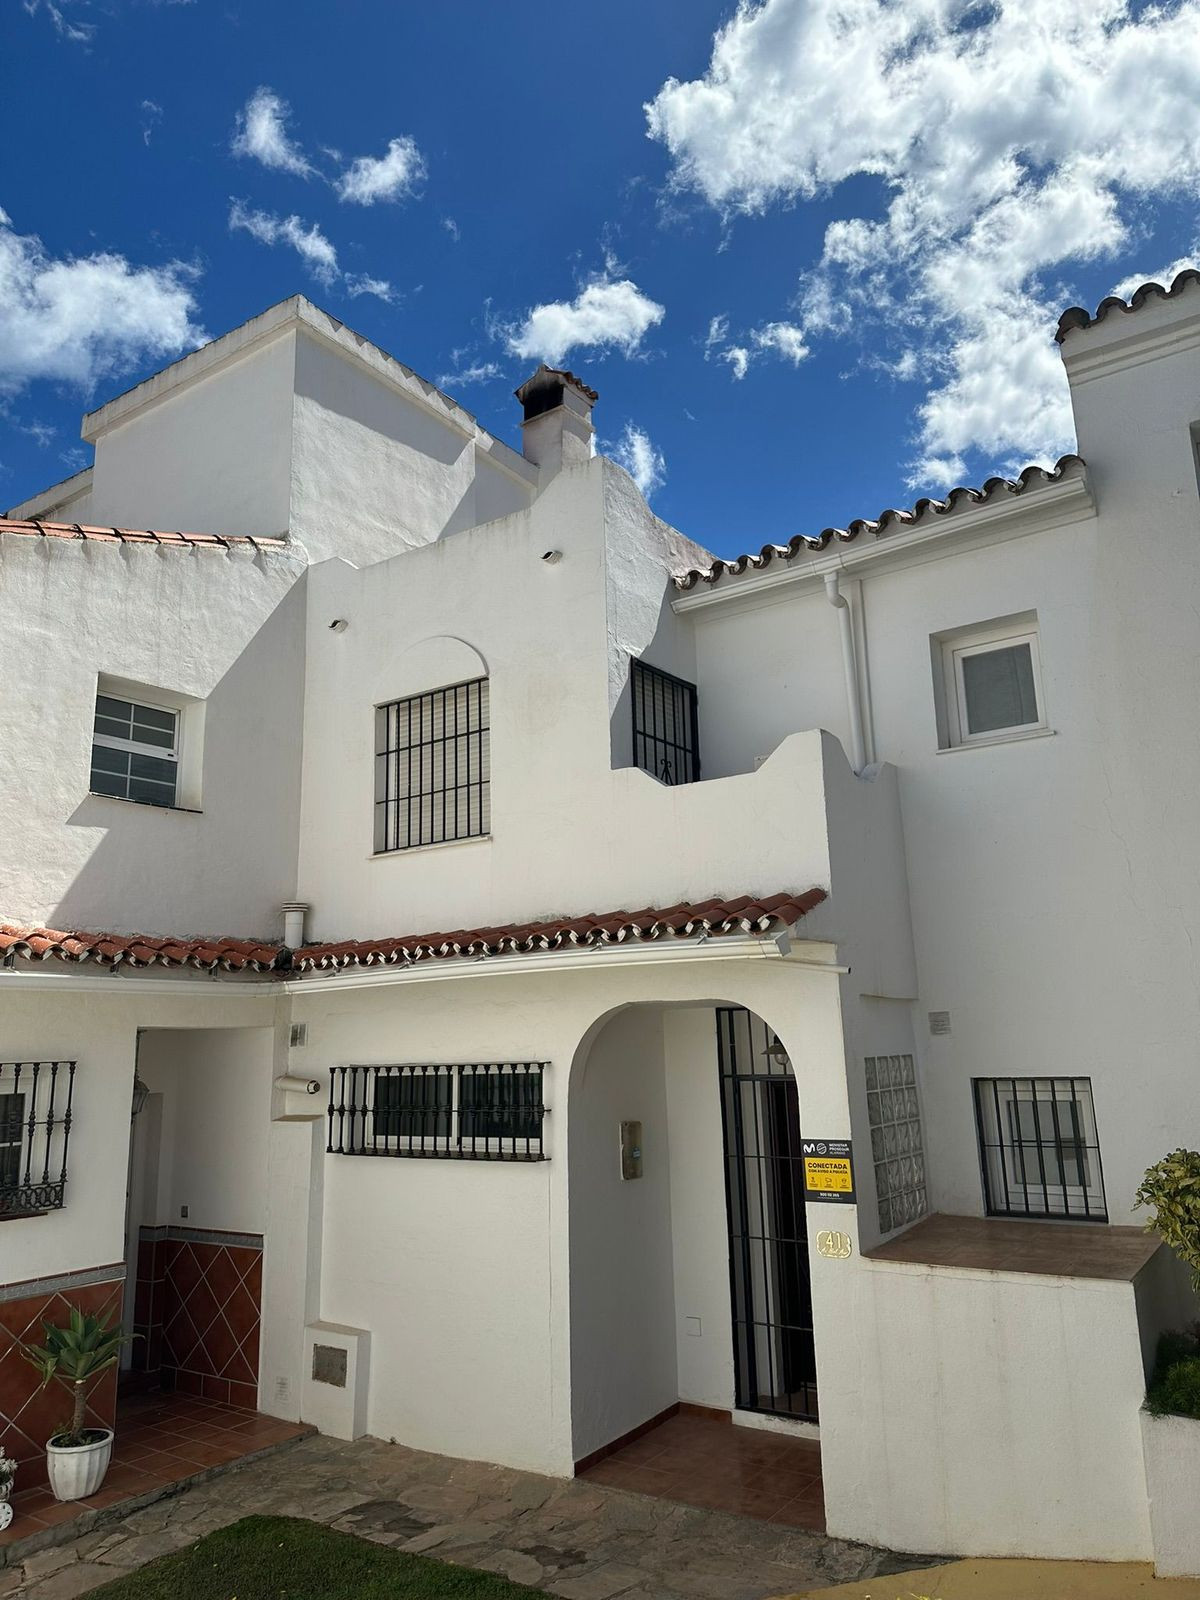 						Townhouse  Terraced
													for sale 
																			 in Bel Air
					